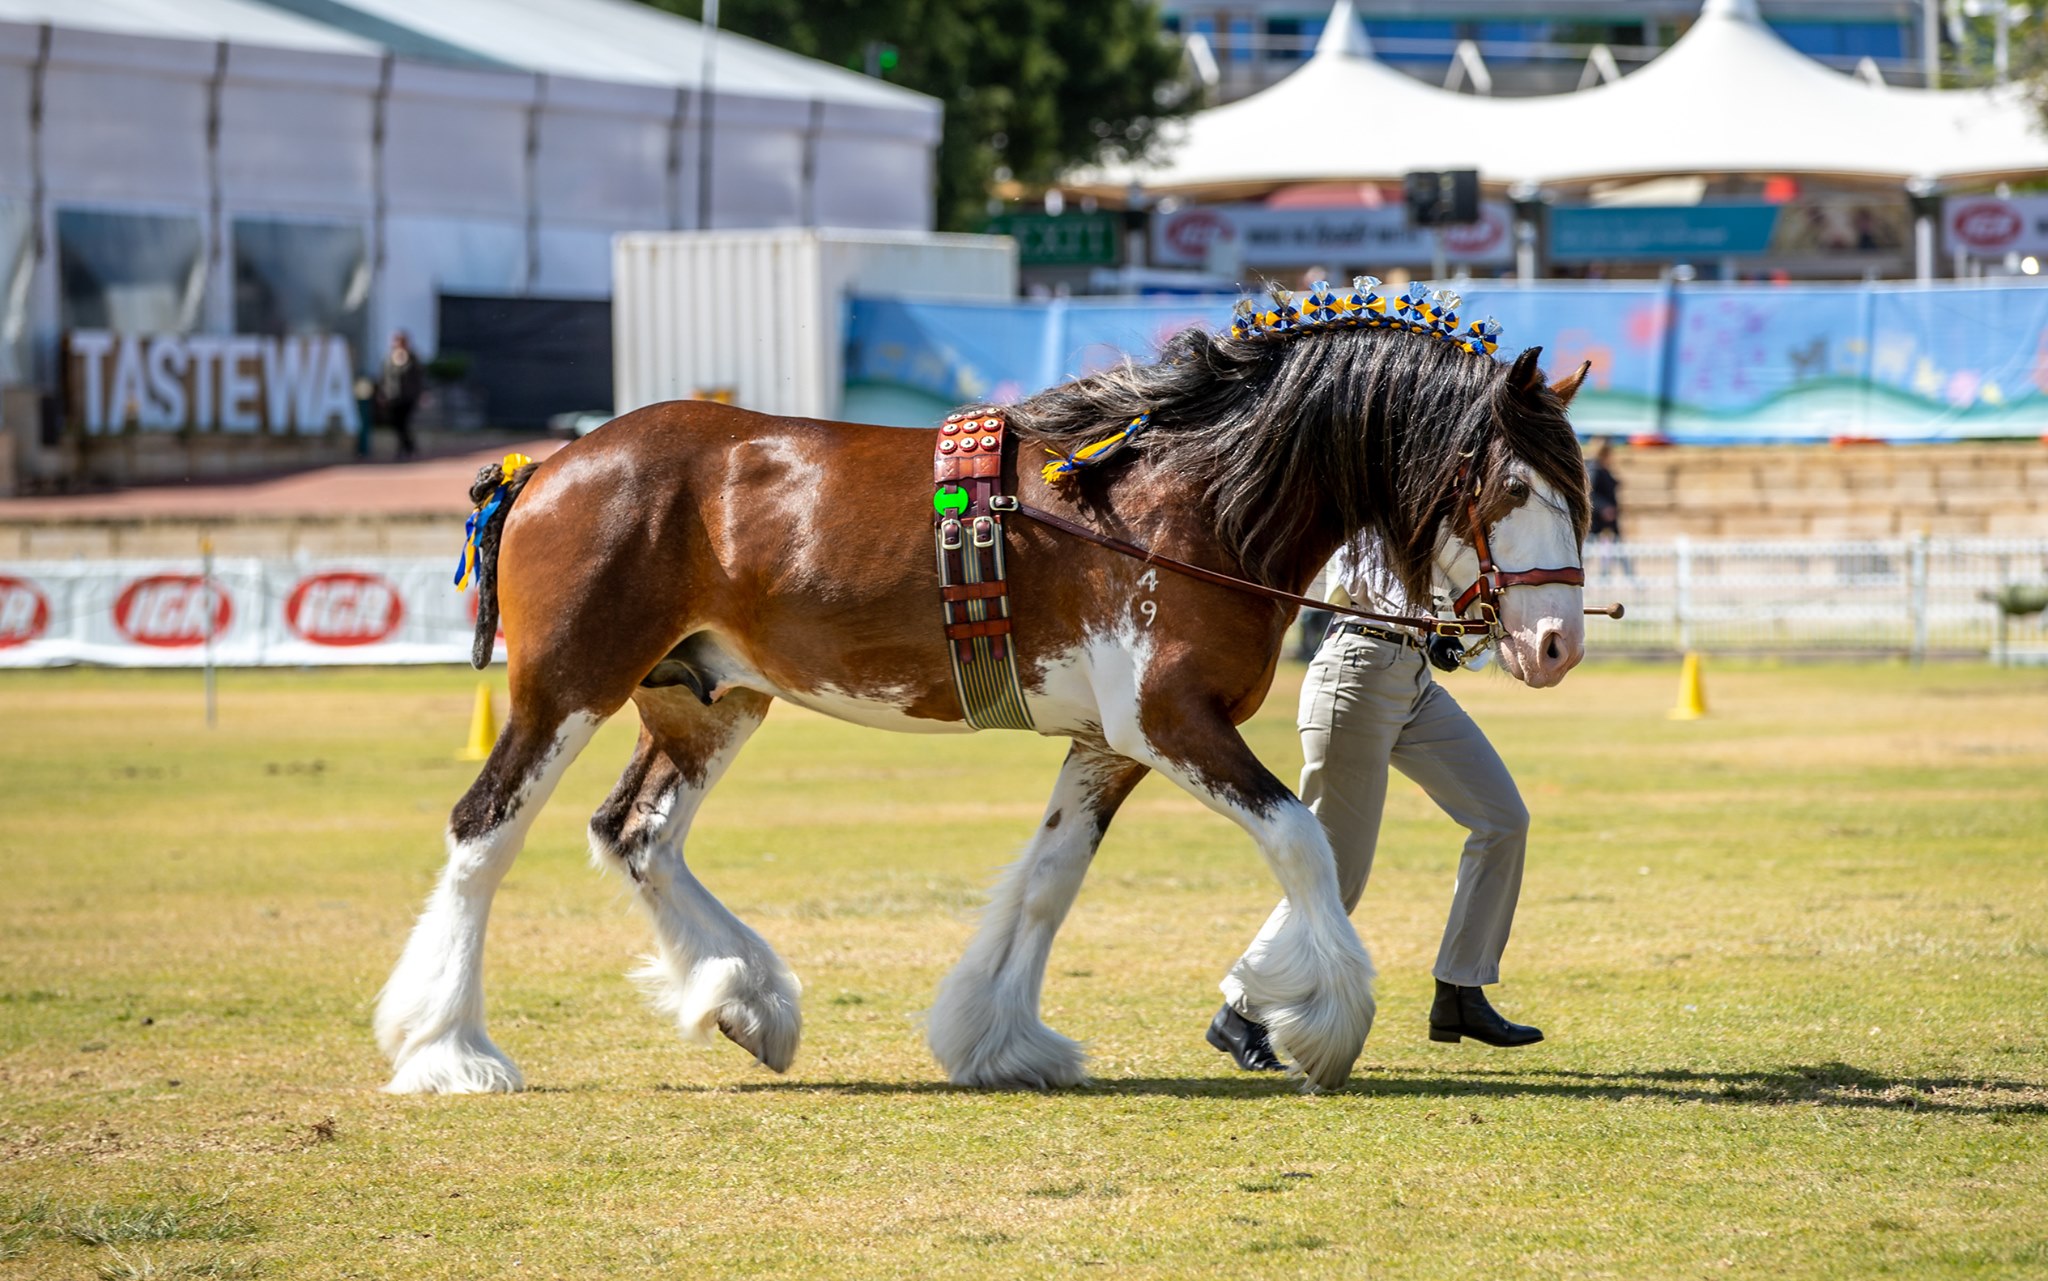 Skyesdale Stud Clydesdales